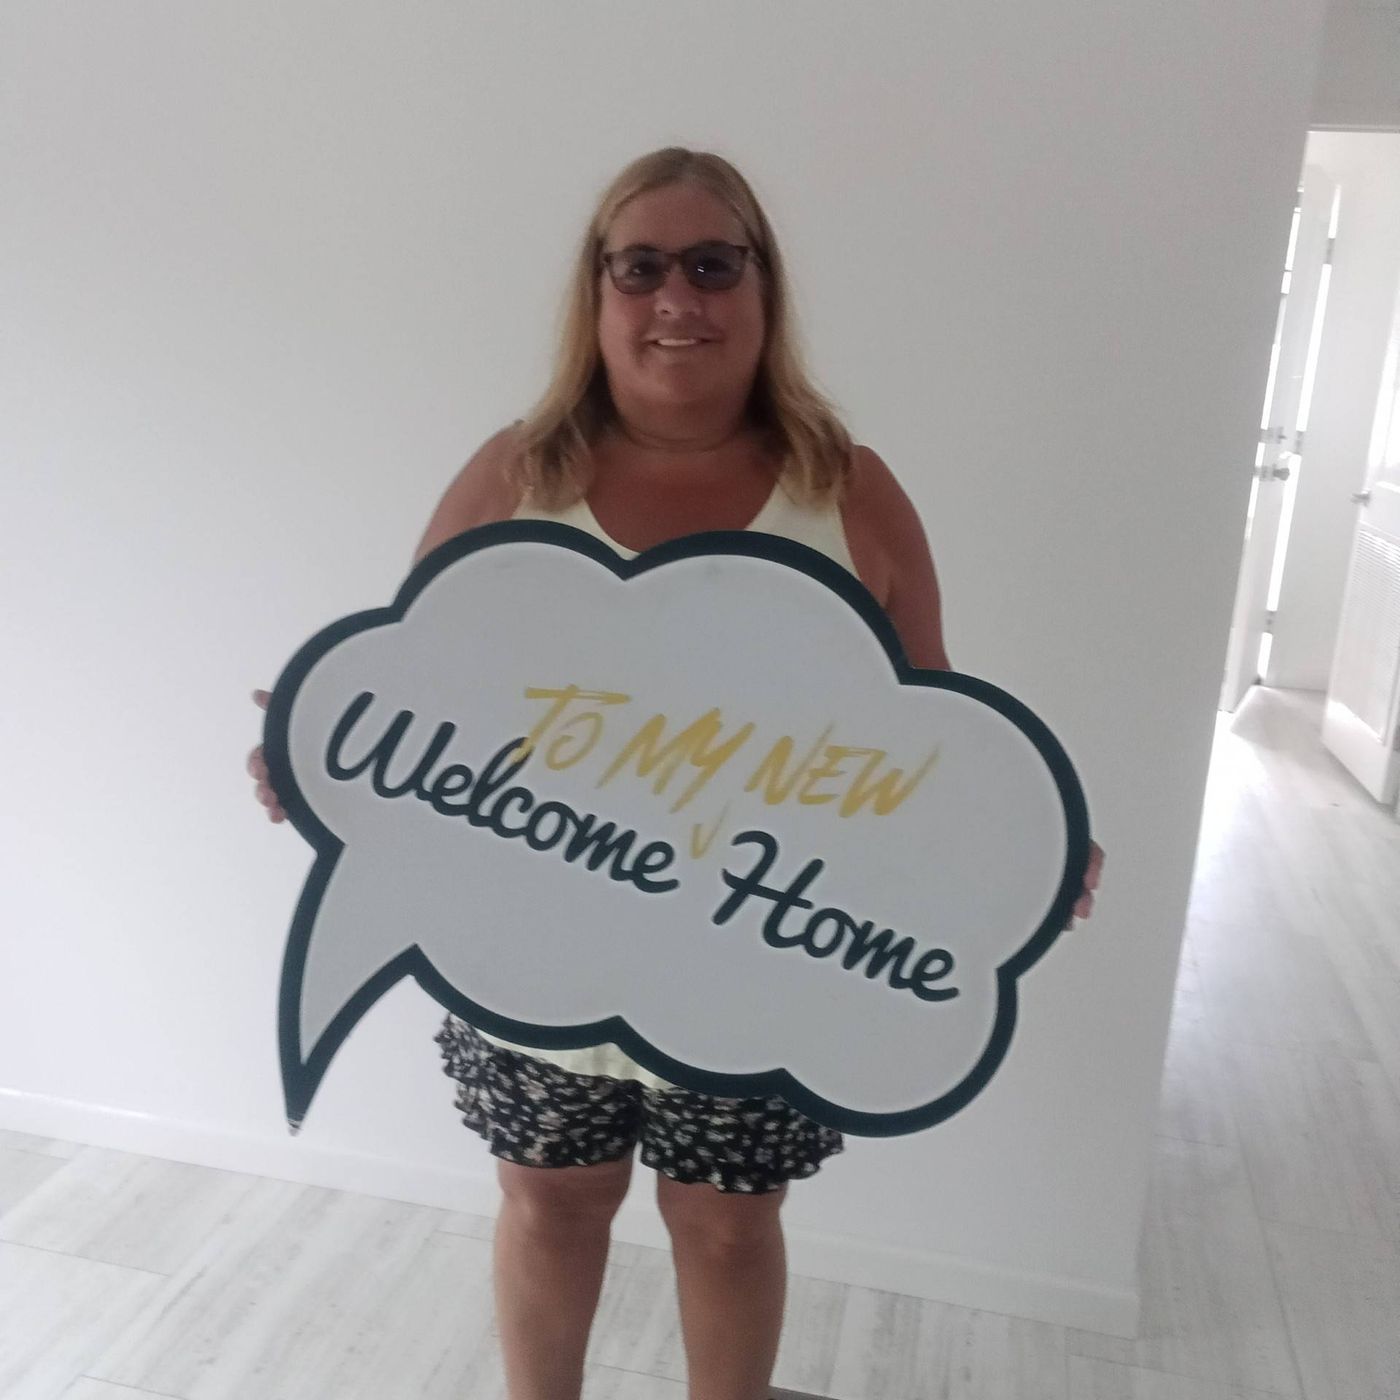 Jeanne R. welcome home image